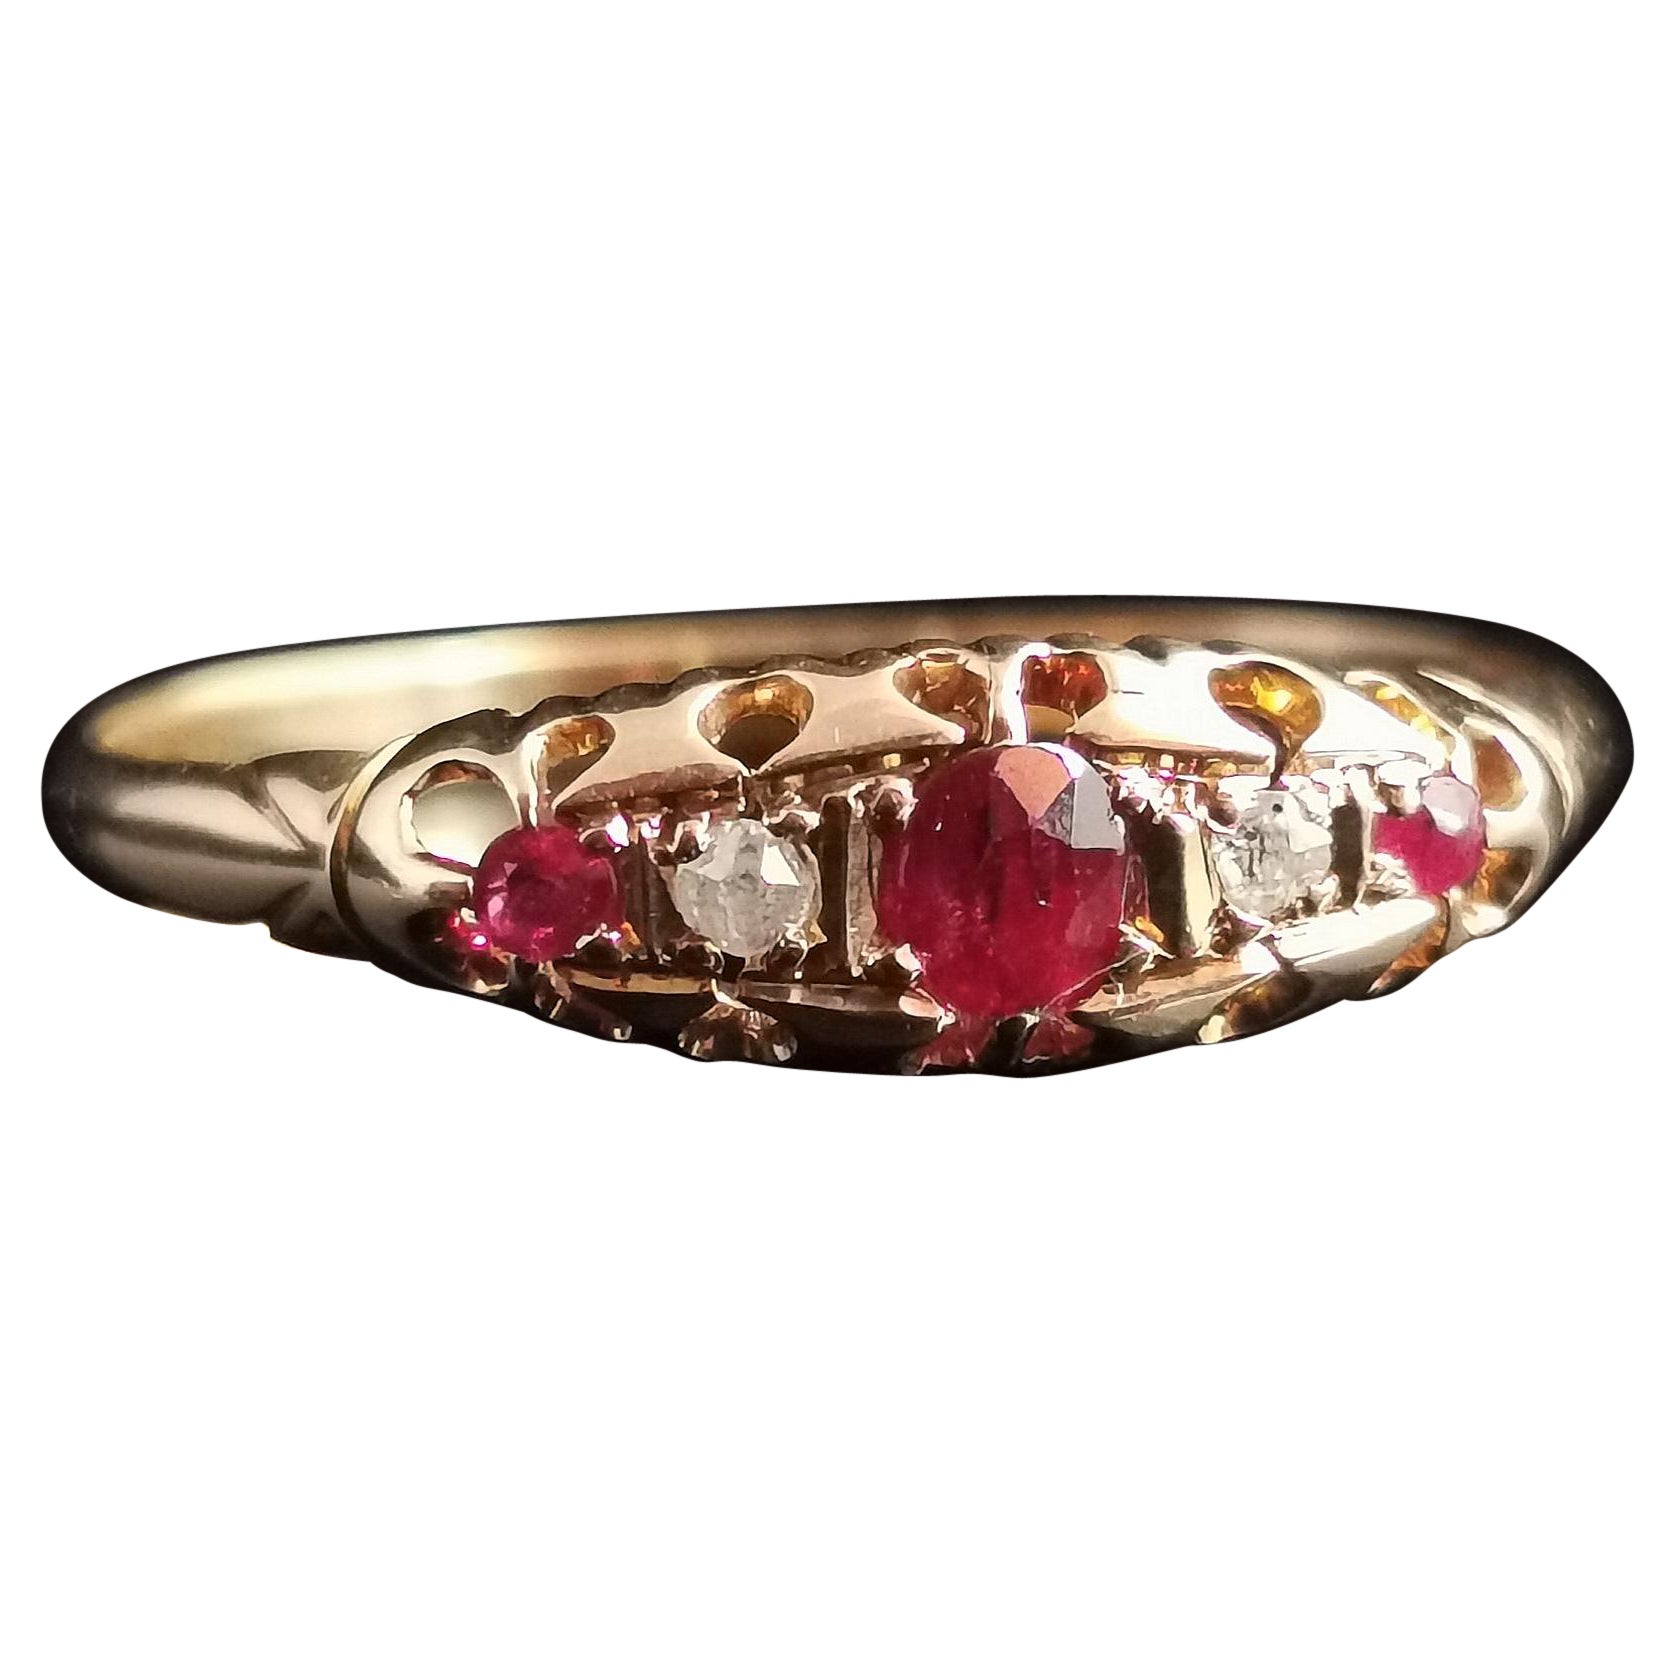 Antique Victorian Ruby and Diamond Ring, 18 Karat Yellow Gold